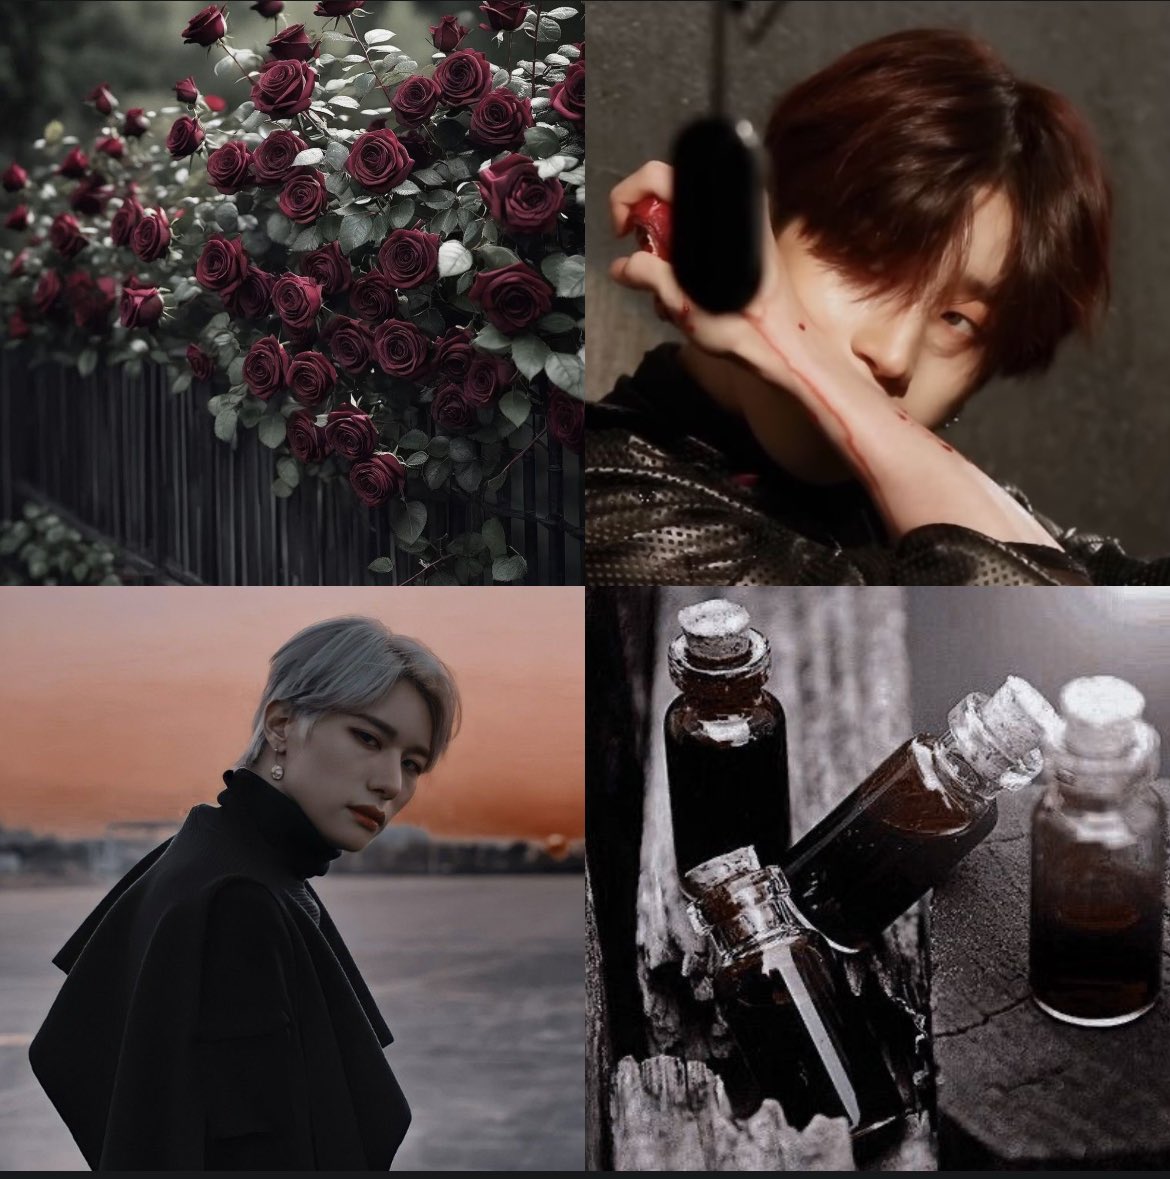 𝒫𝓇ℯ𝓋𝒾ℯ𝓌 𝓉ℴ 𝓌ℴ𝓇𝓀 !!

And every time roses bloom in his garden, every time another victim falls into his net, and once again he promises himself not to fall in love and fails.